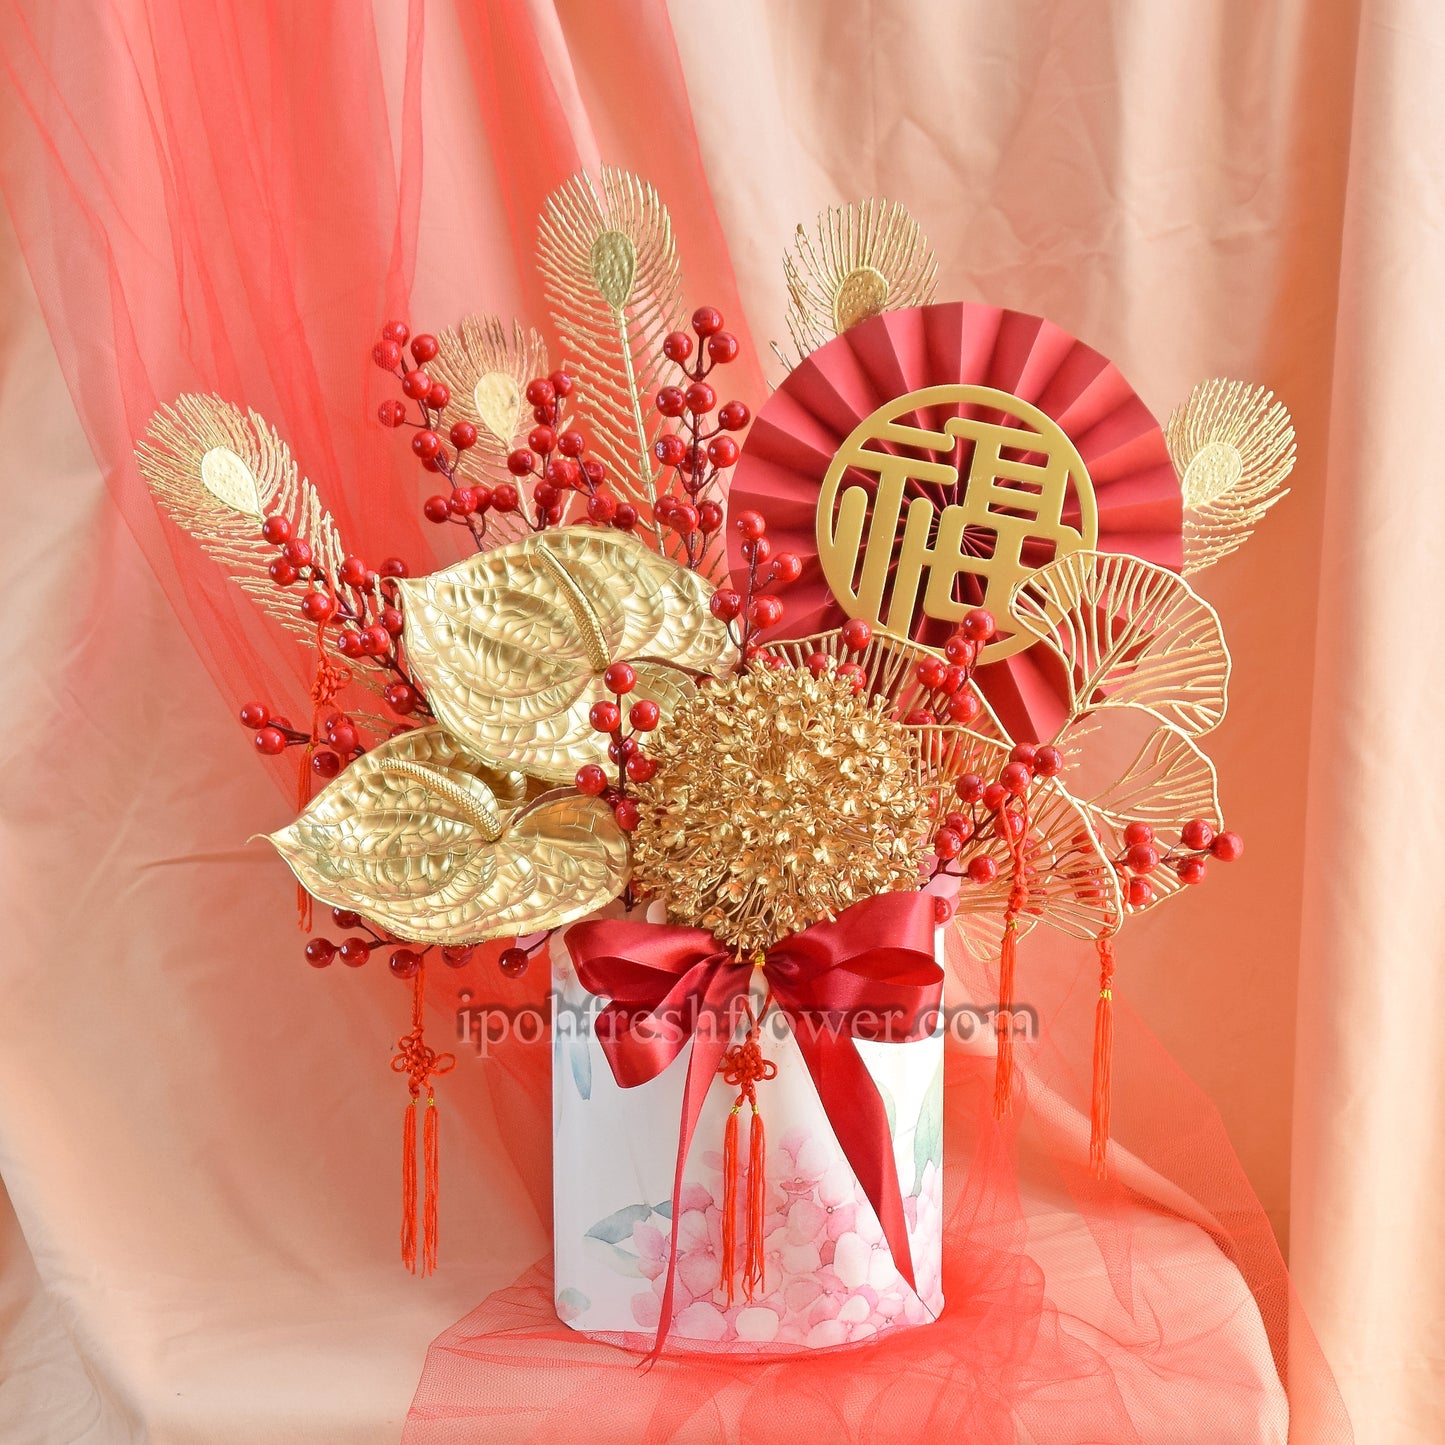 Golden Blossom CNY Artificial Flower Box| Ipoh Flower Delivery 